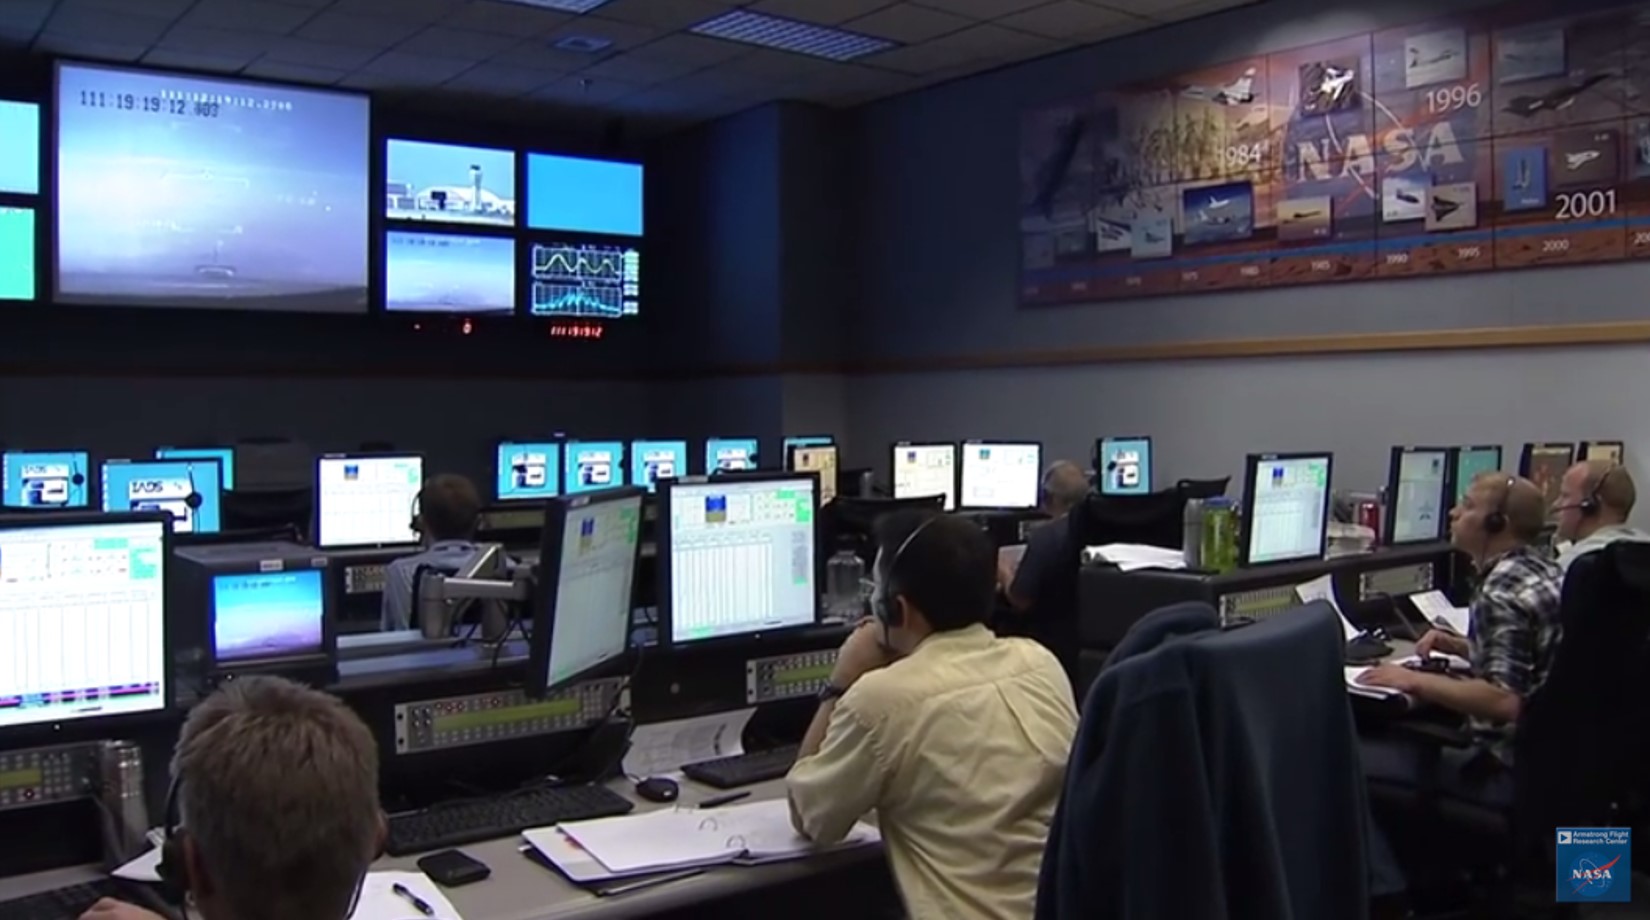 Mission Control Room #1 at Armstrong Flight Research Center.